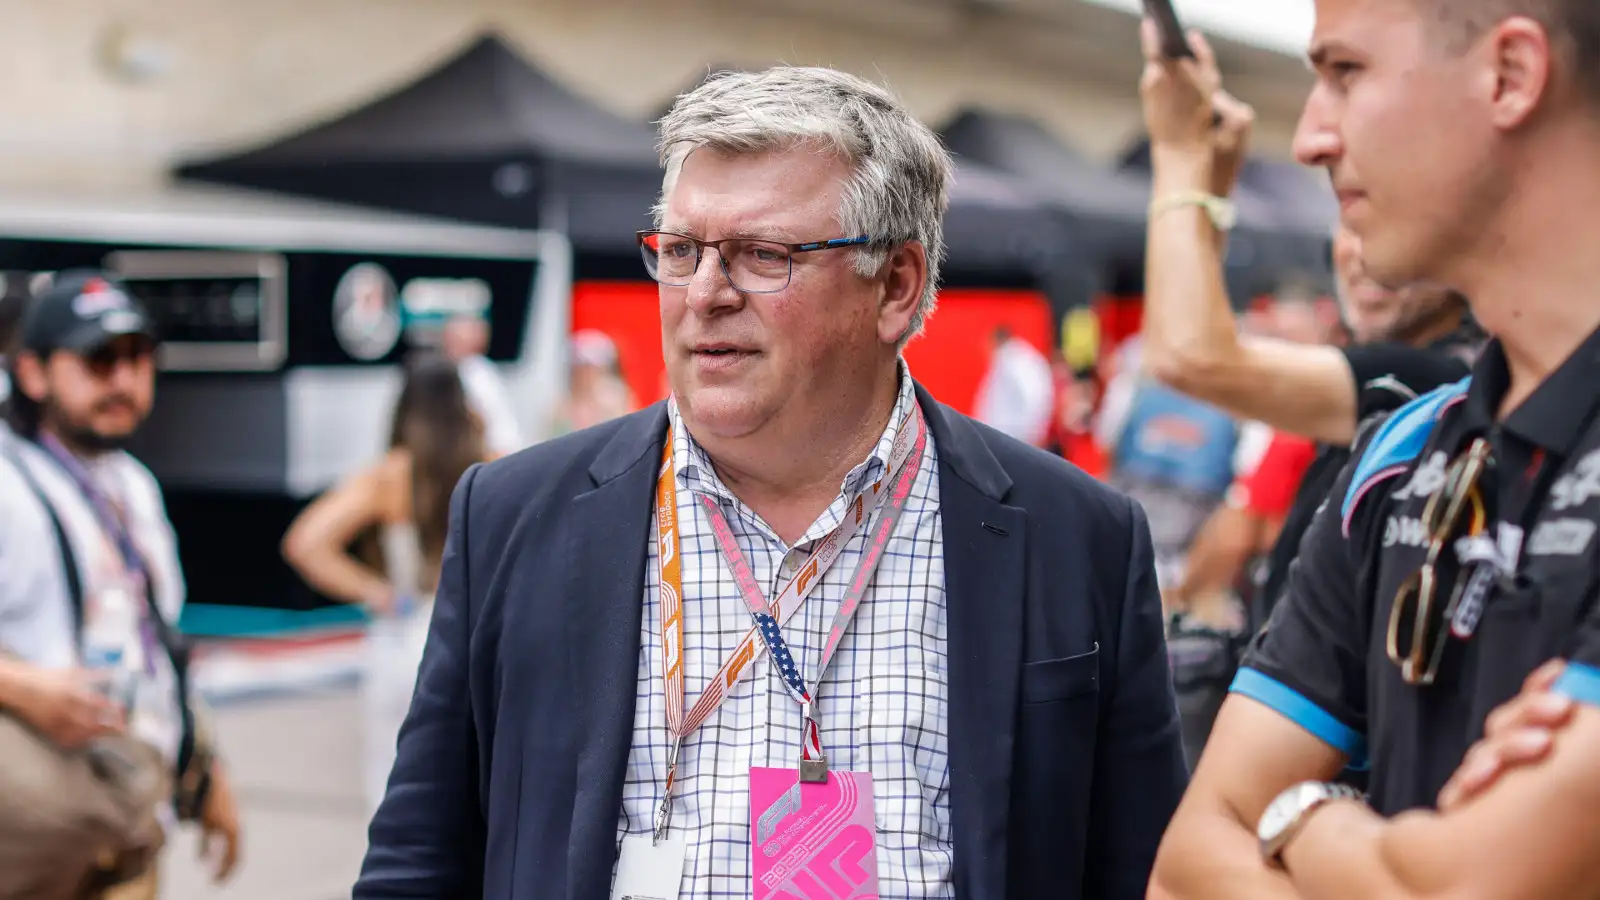 Otmar Szafnauer attended the US Grand Prix at the Circuit of the Americas.